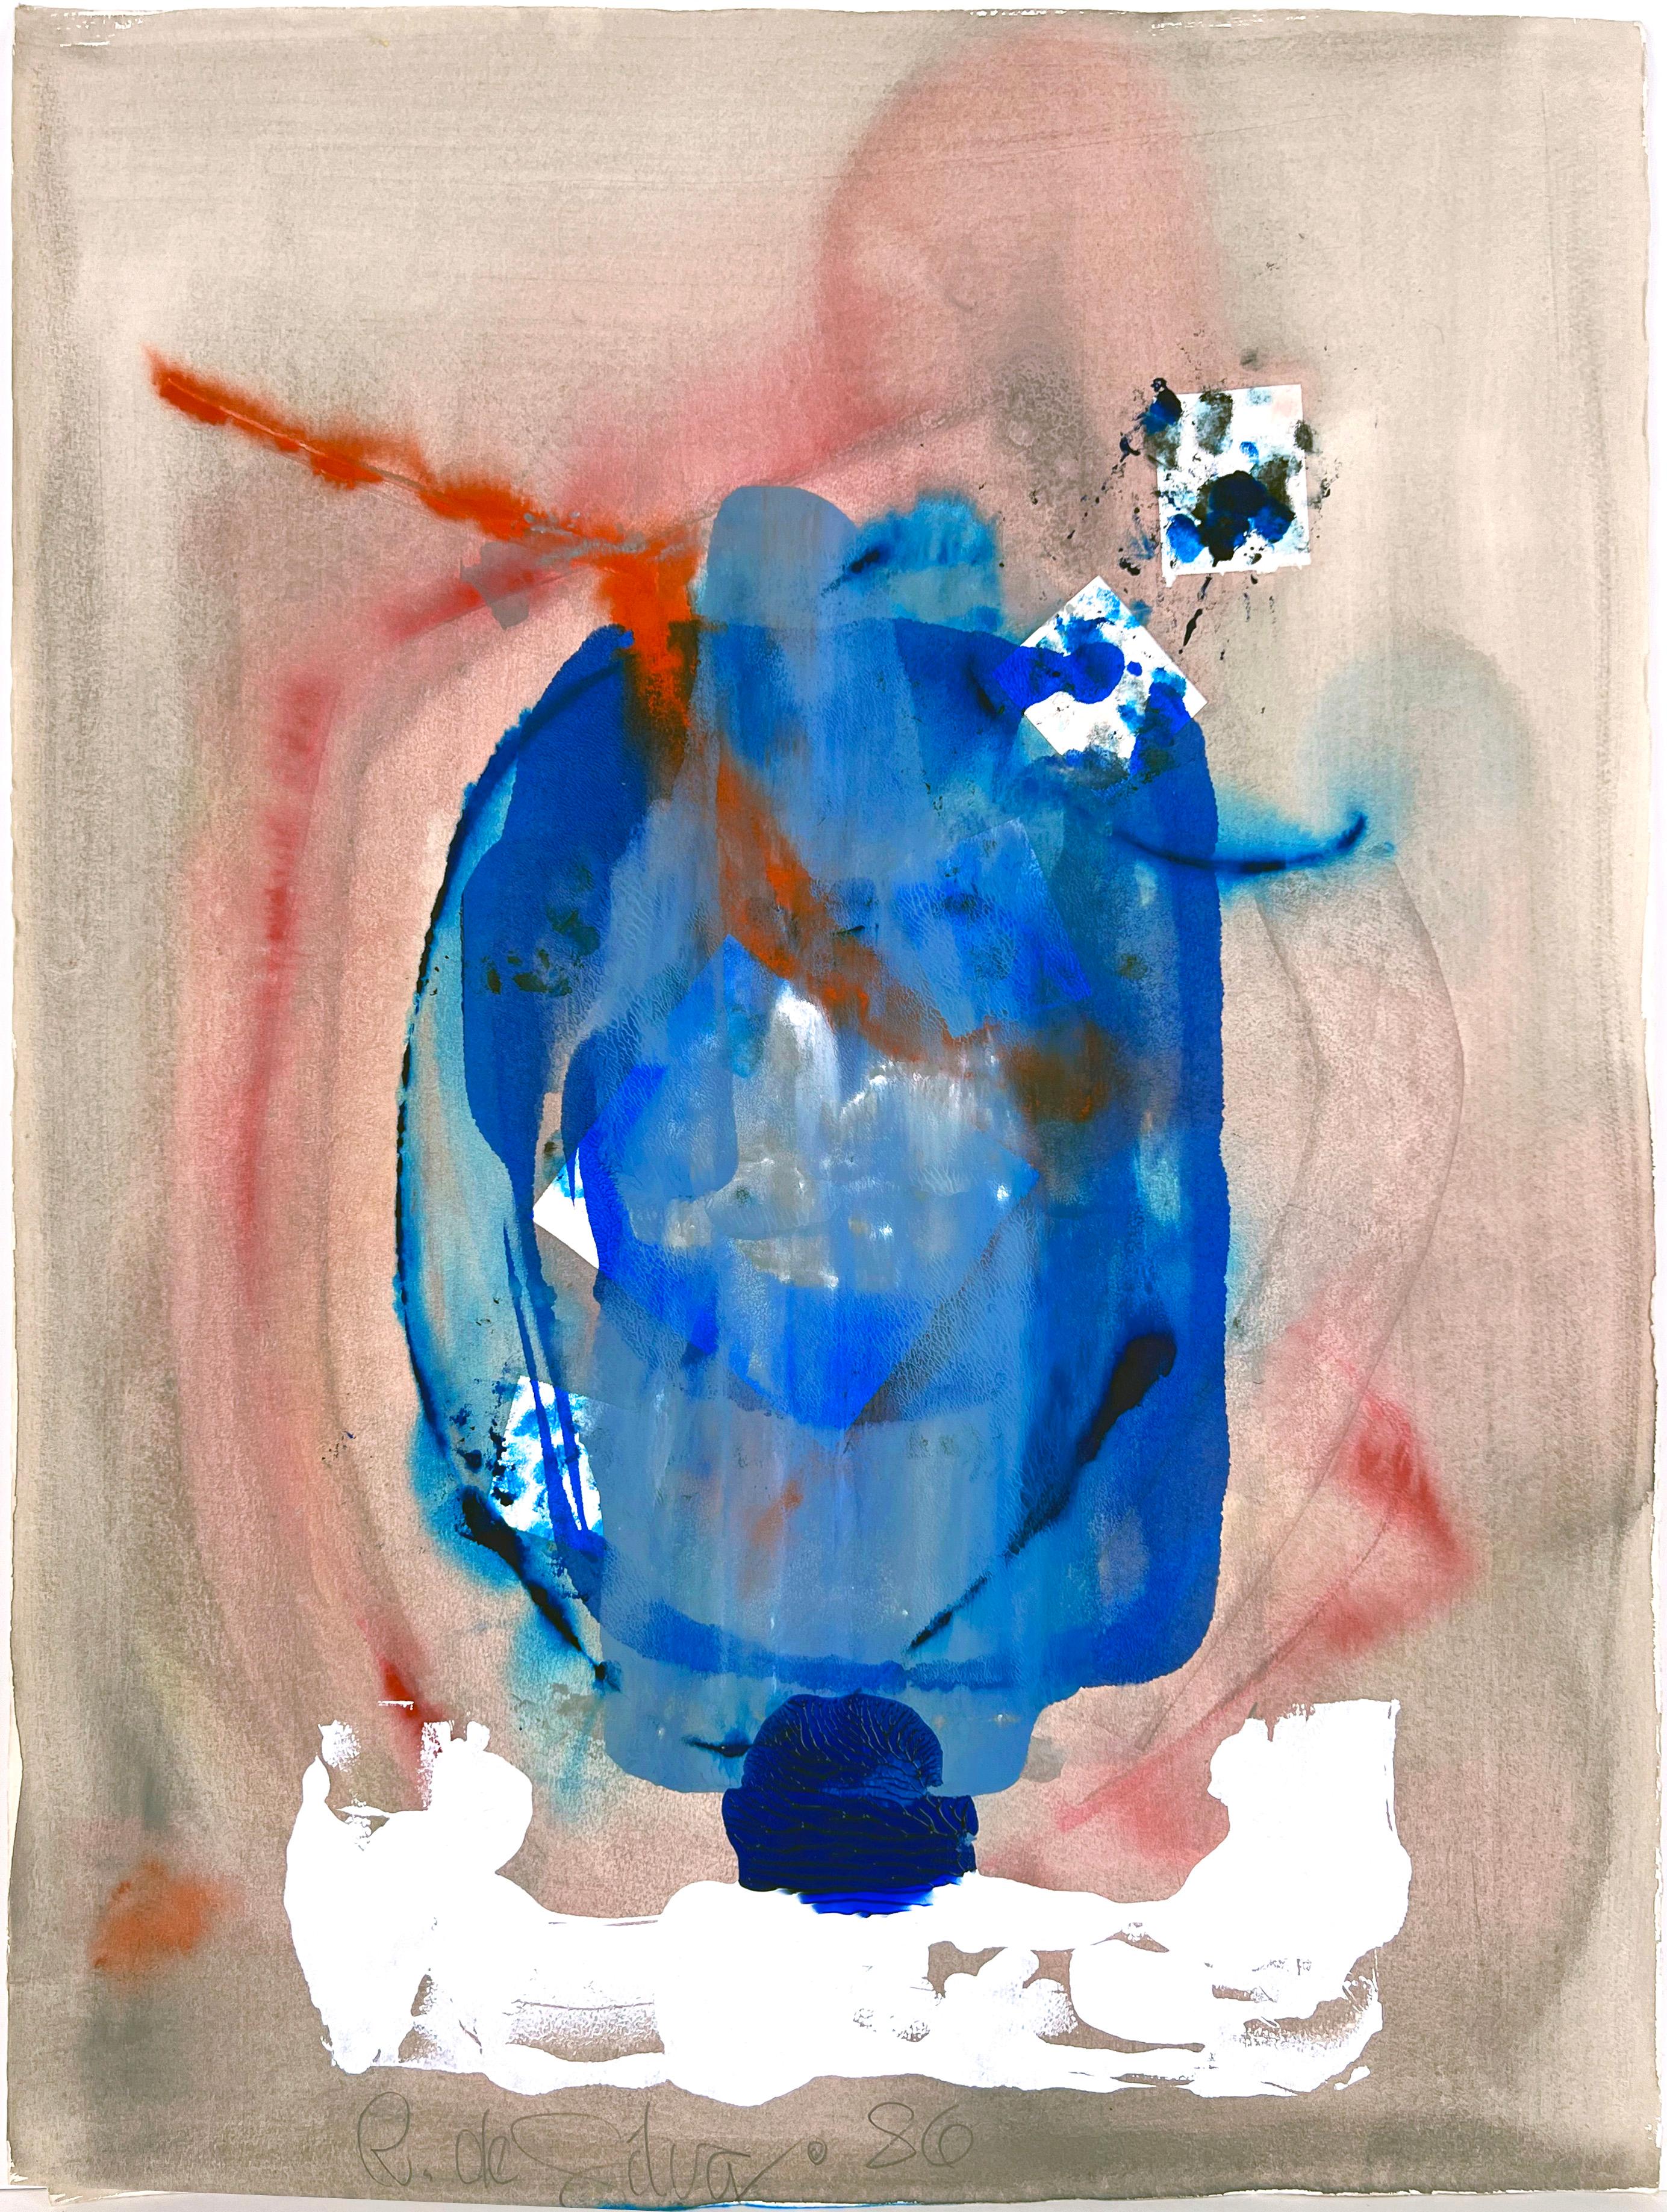 Ricardo de Silva Abstract Painting - "A New Idea" in Blue  - Figural Abstract Composition in Acrylic on Paper